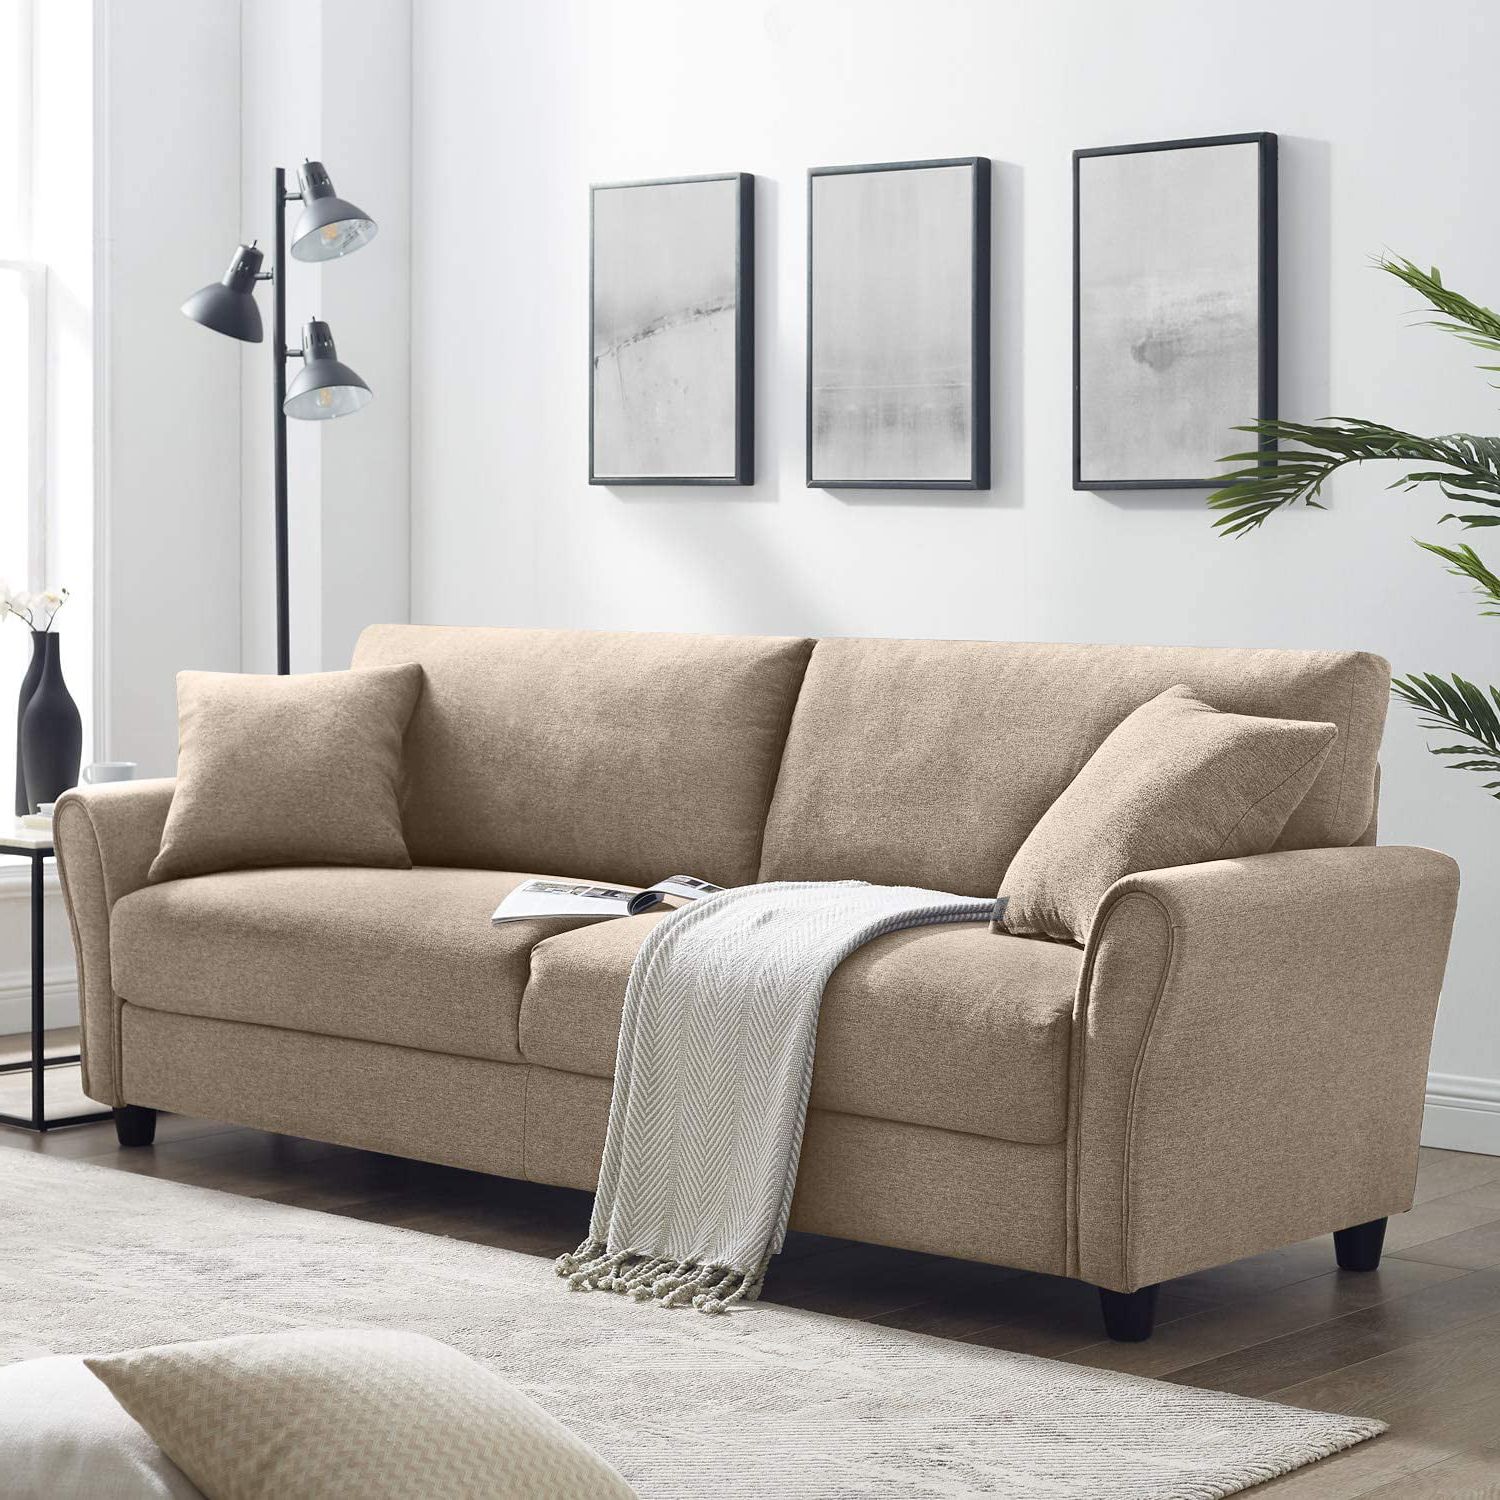 Furniture Sofas & Couches 85 Inch Couch Sofa Modern Upholstered Linen With Regard To Sofas For Compact Living (View 15 of 20)